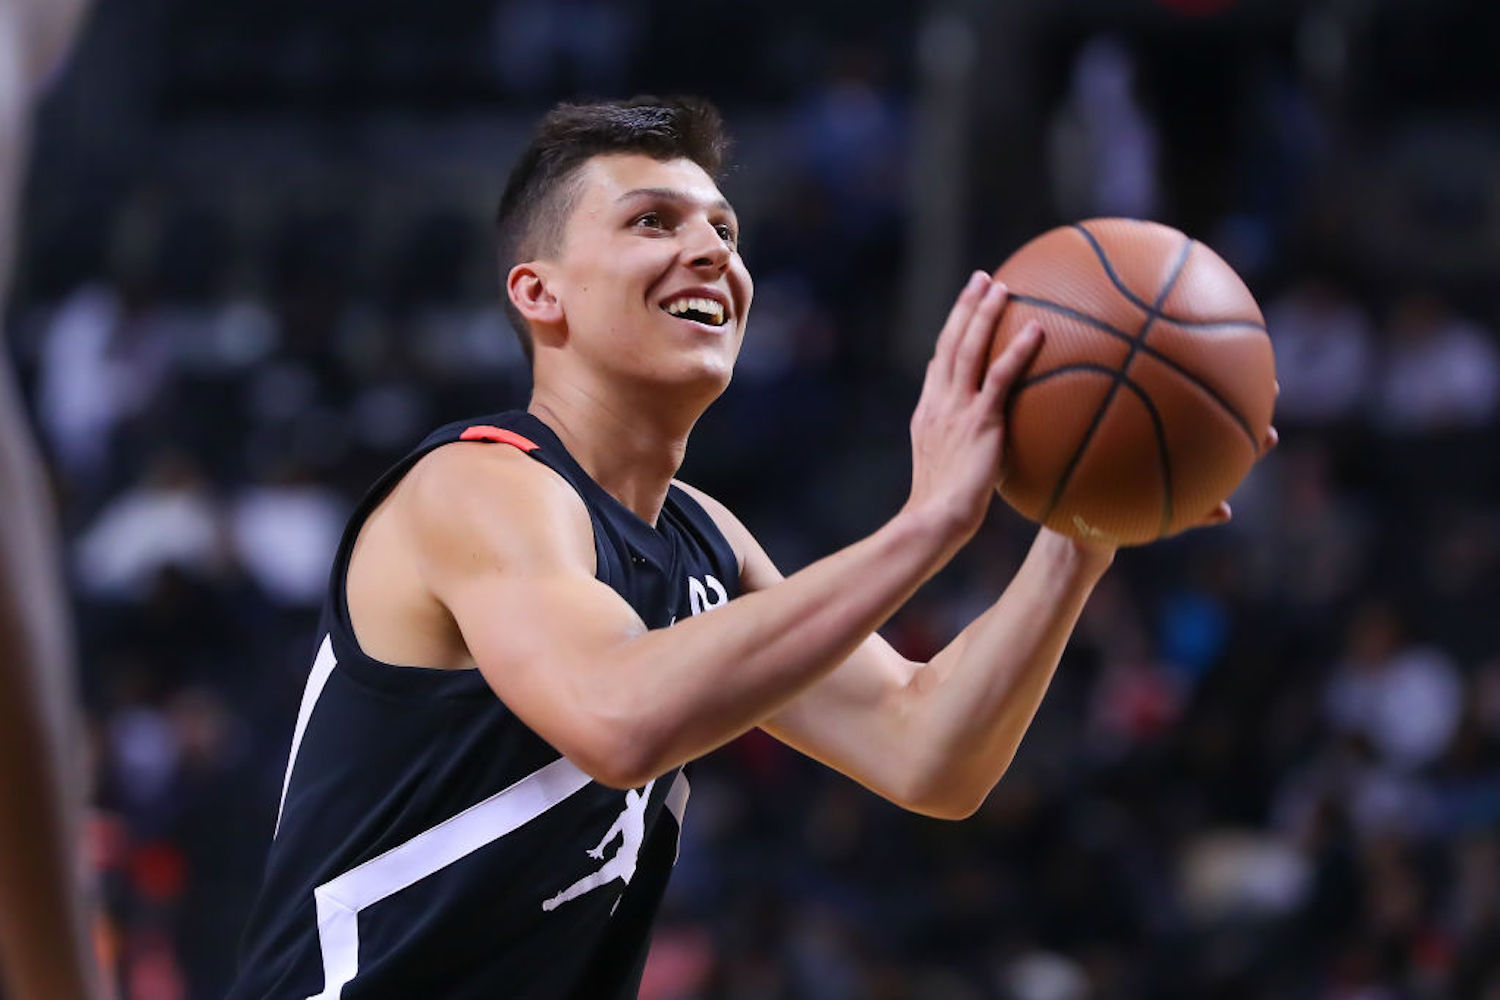 Zion Williamson was the top recruit in the 2018 high school class, but he saw great things in another top player in the group — Tyler Herro.